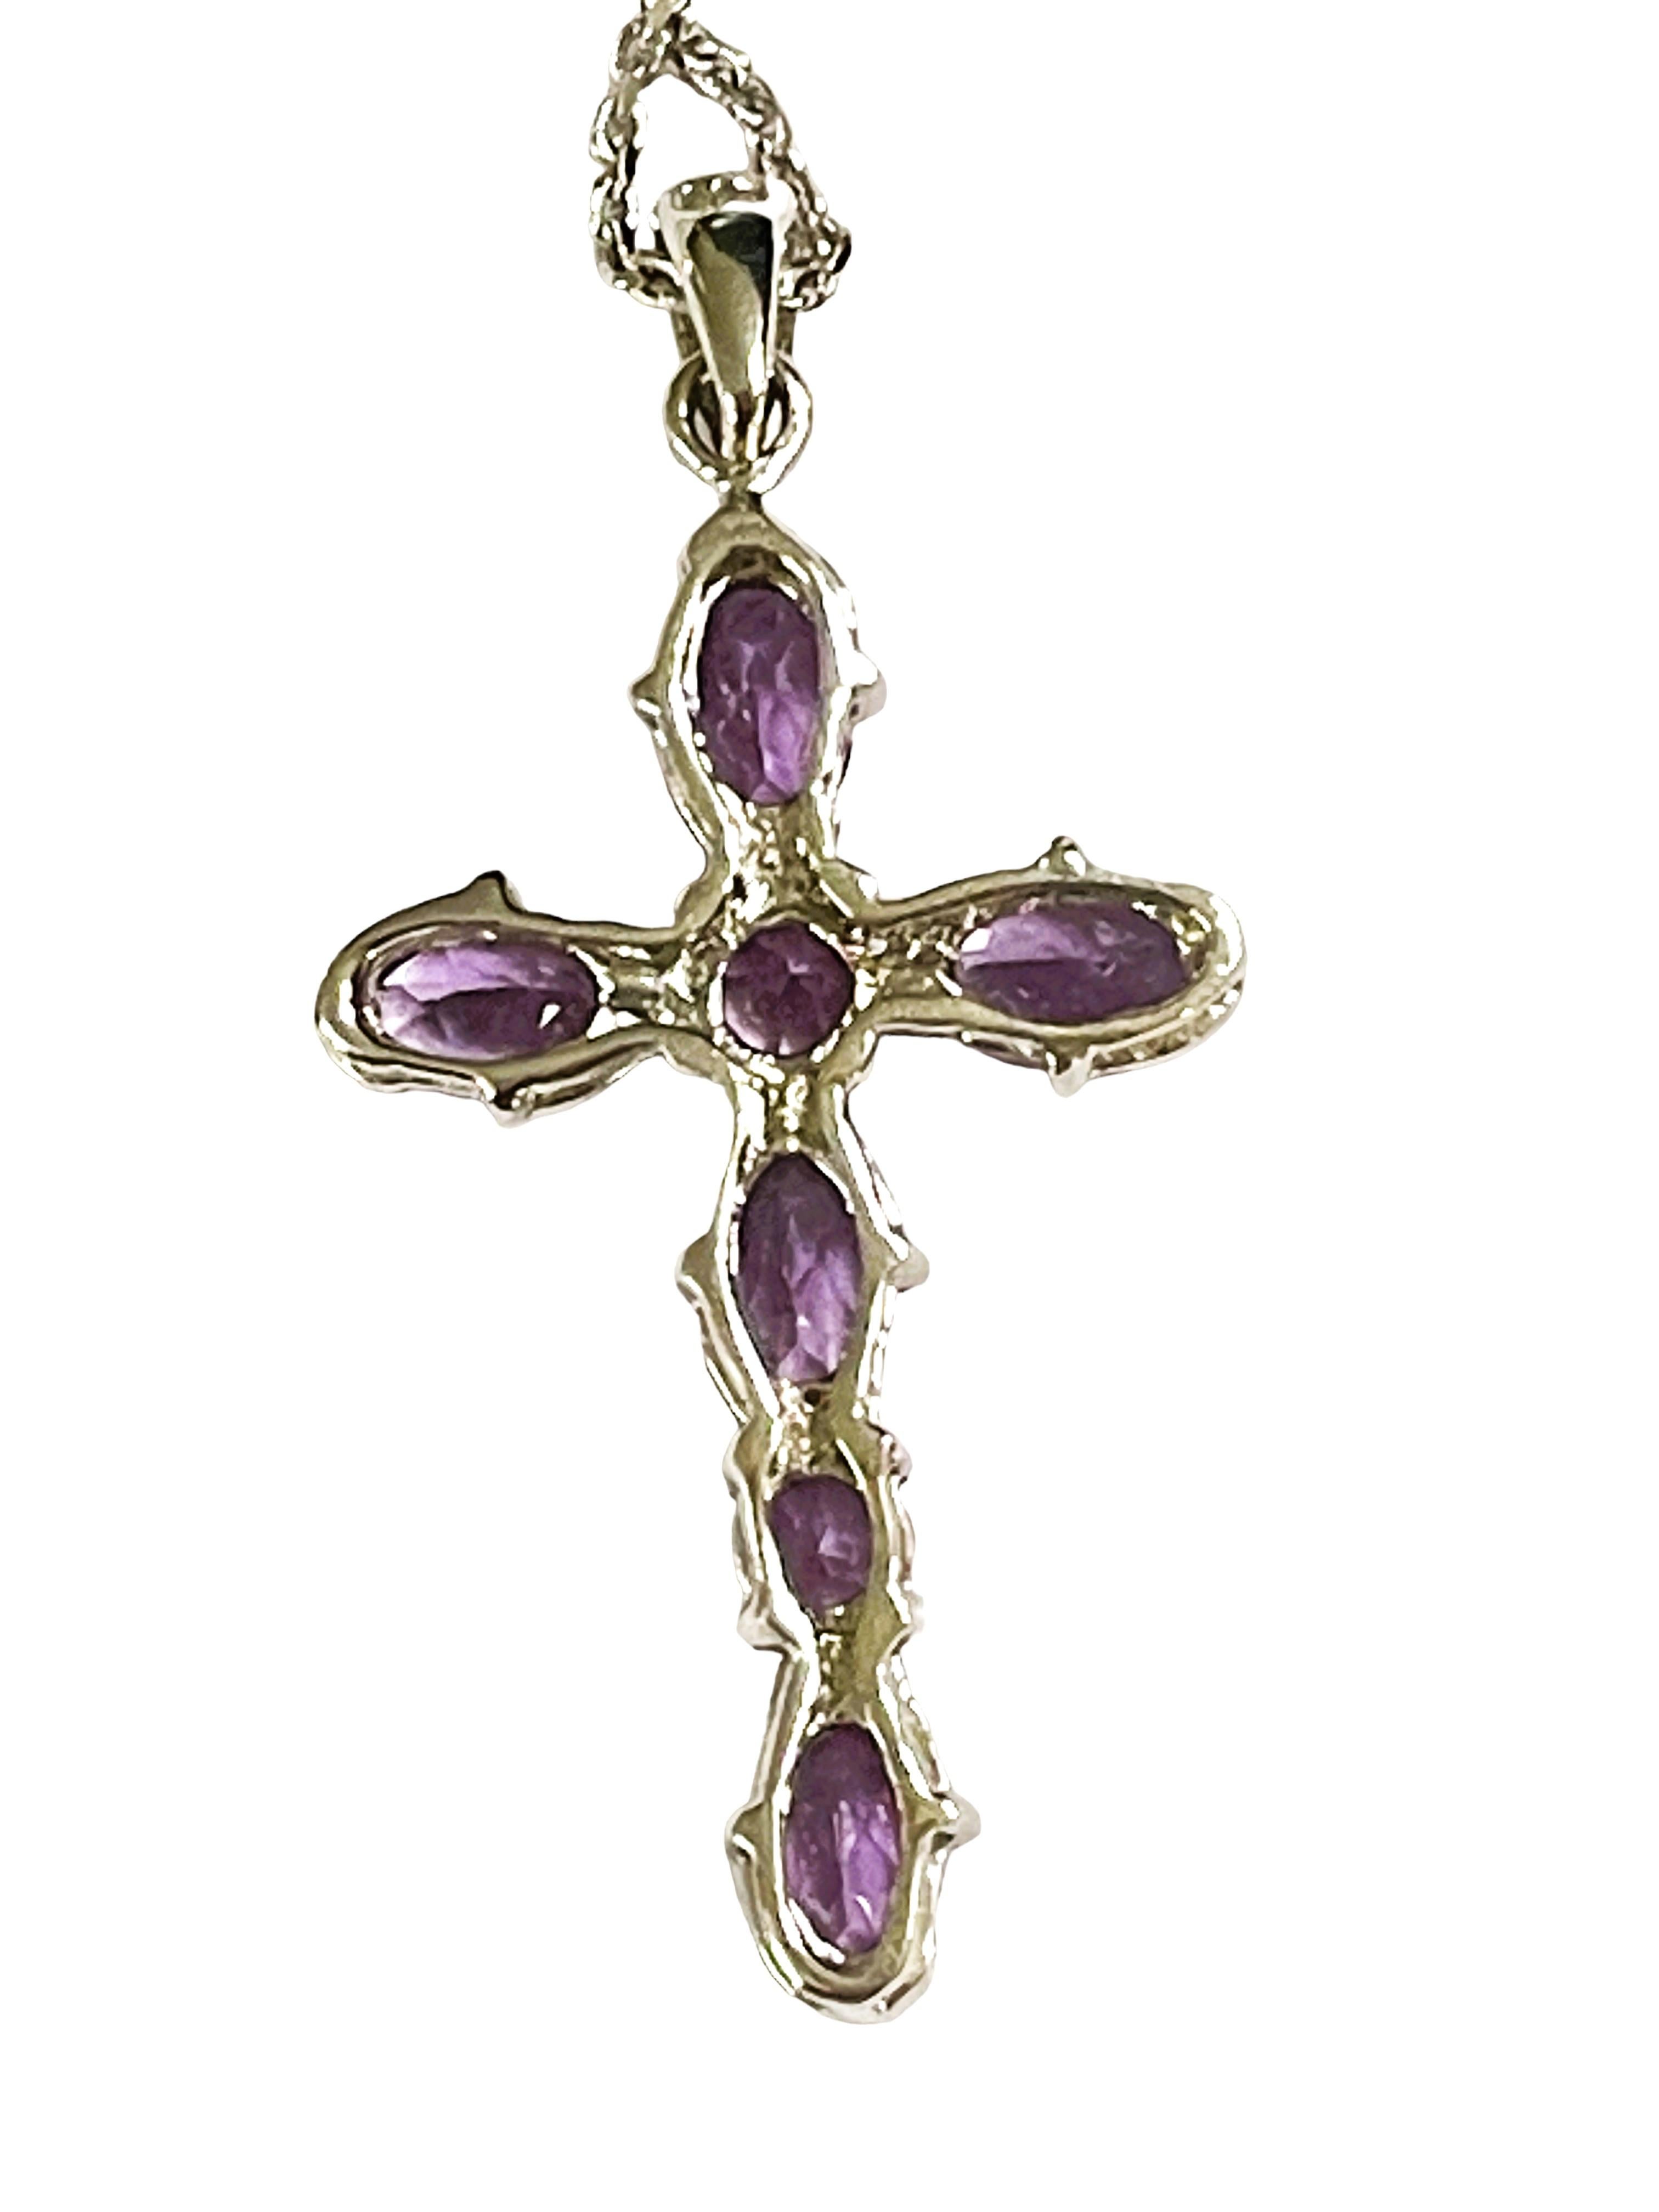 New Amethyst Sterling Silver Cross Necklace with Adjustable Chain For Sale 1